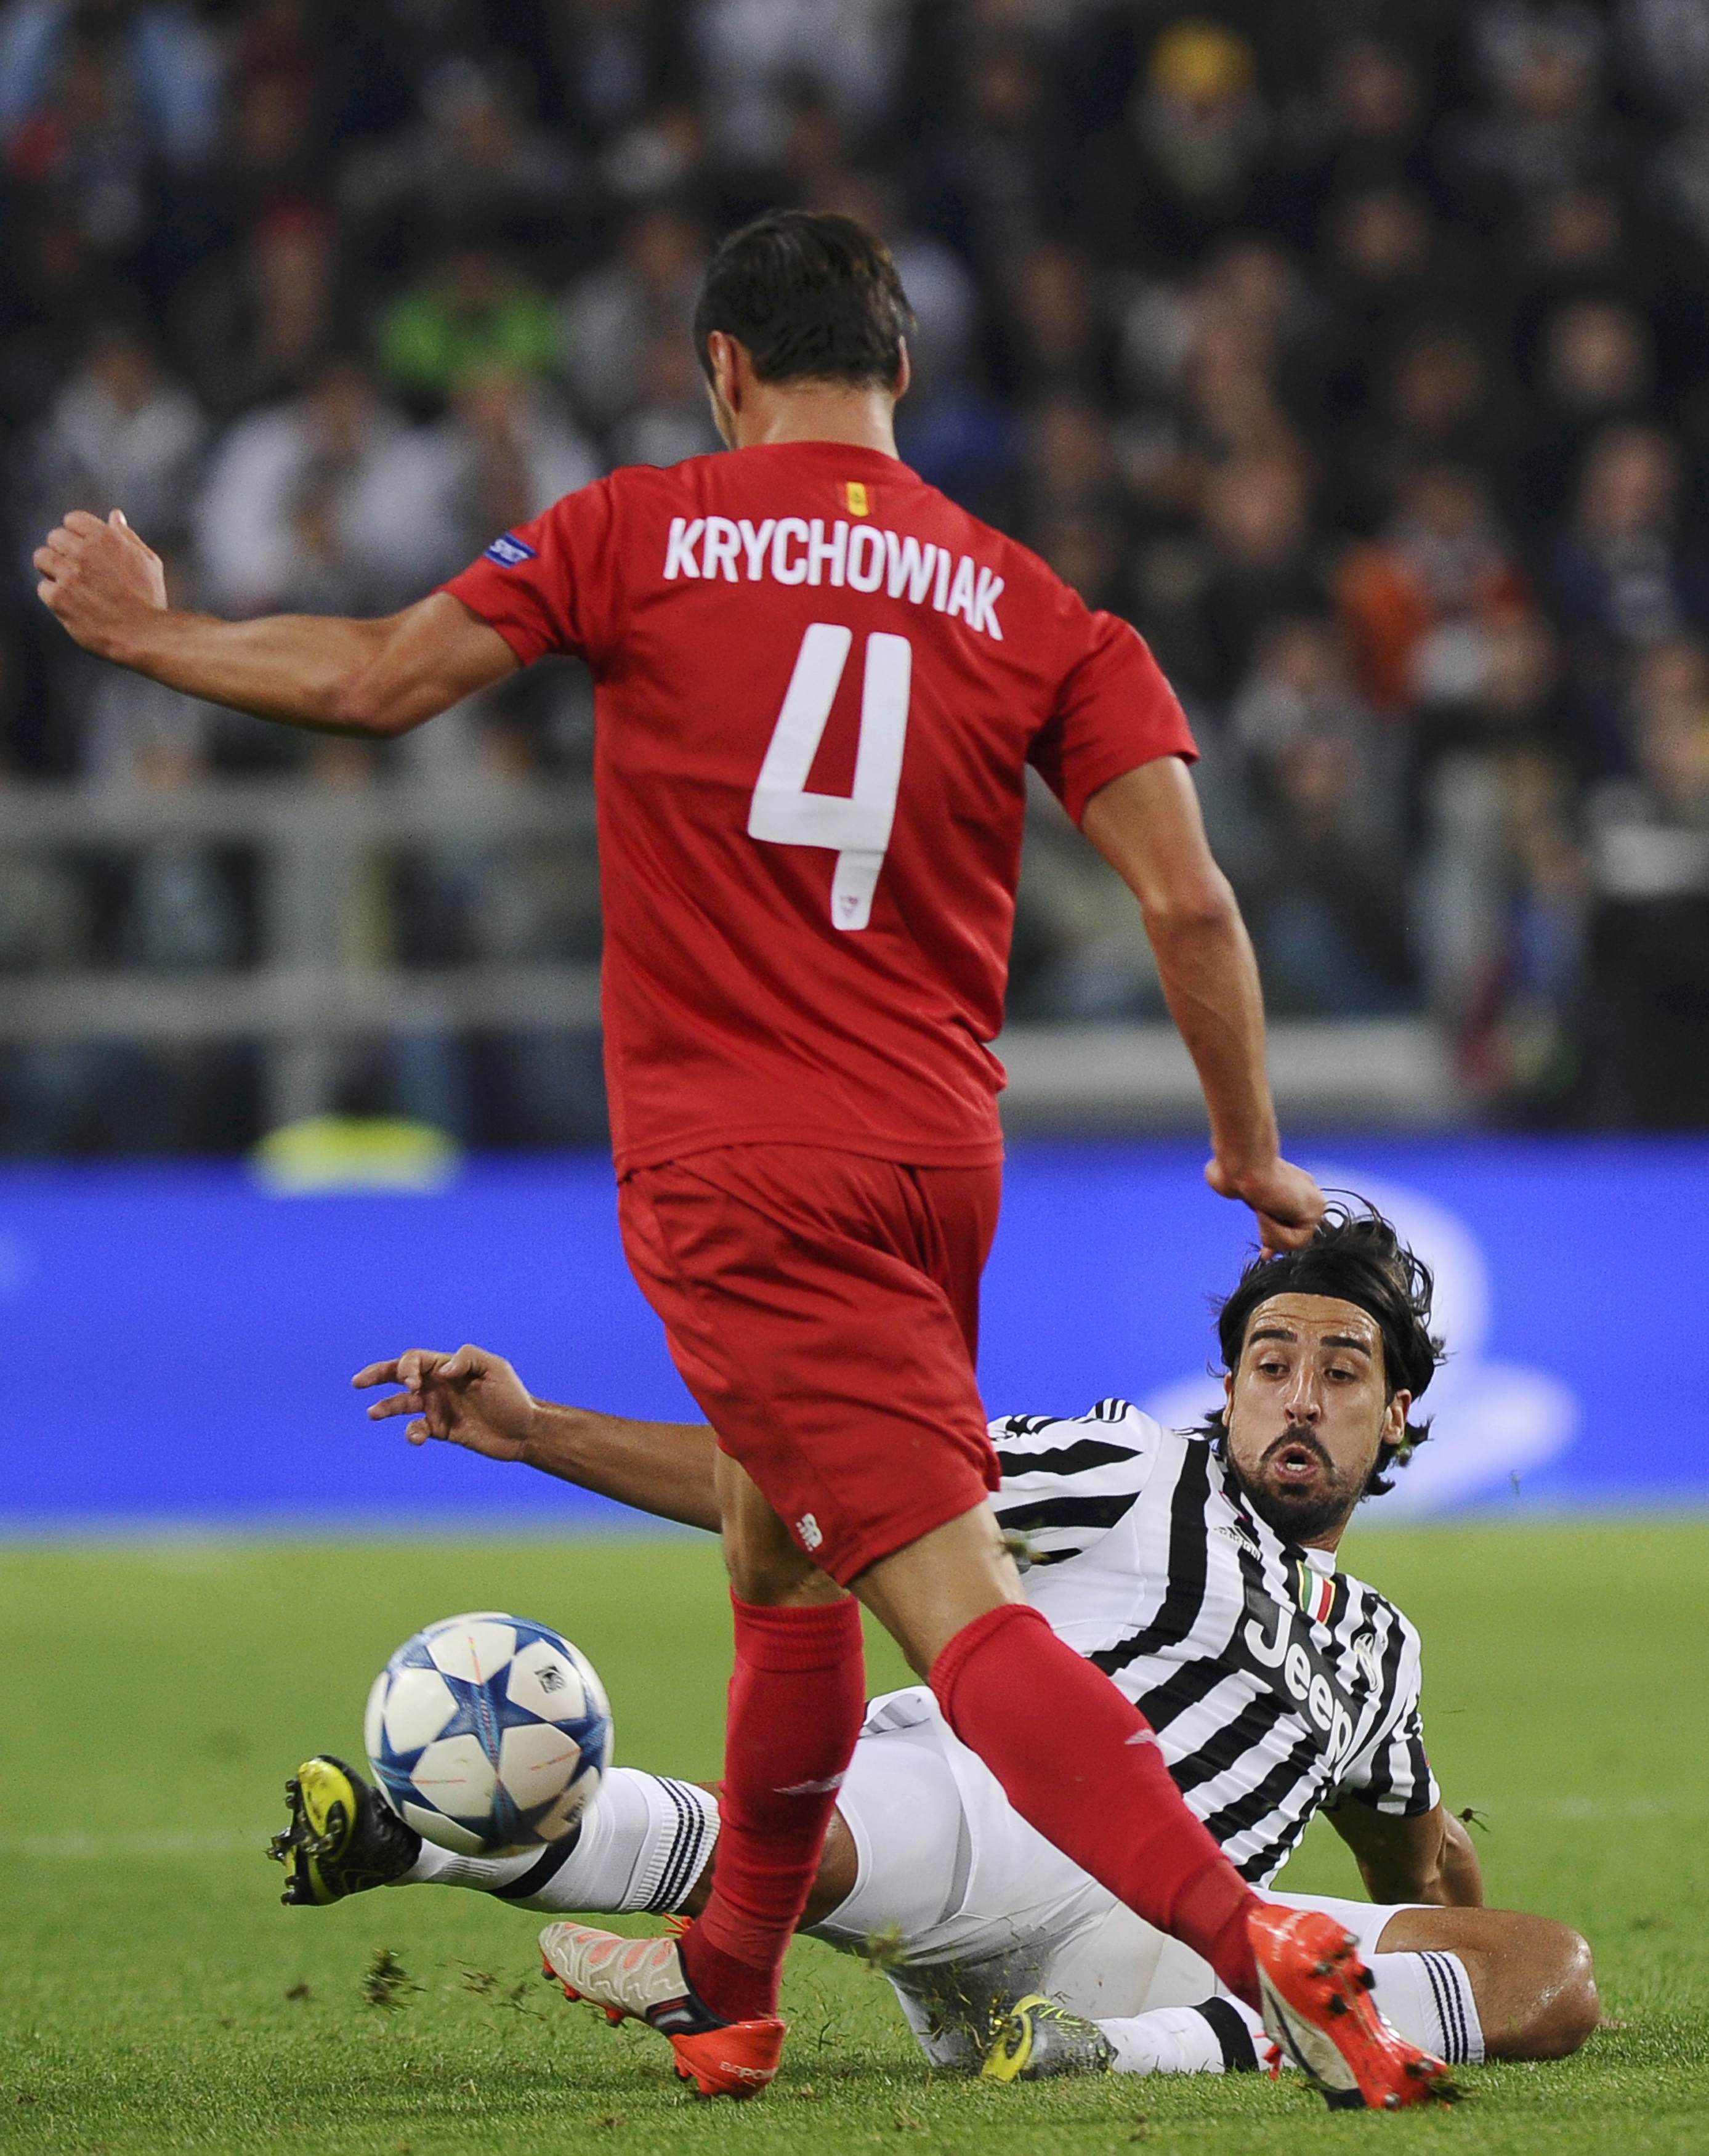 Juventus Sami Khedira (R) challenges Sevilla's Grzegorz Krychowiak during their Champions League group D soccer match at Juventus stadium in Turin, Italy, September 30, 2015. REUTERS/Giorgio Perottino